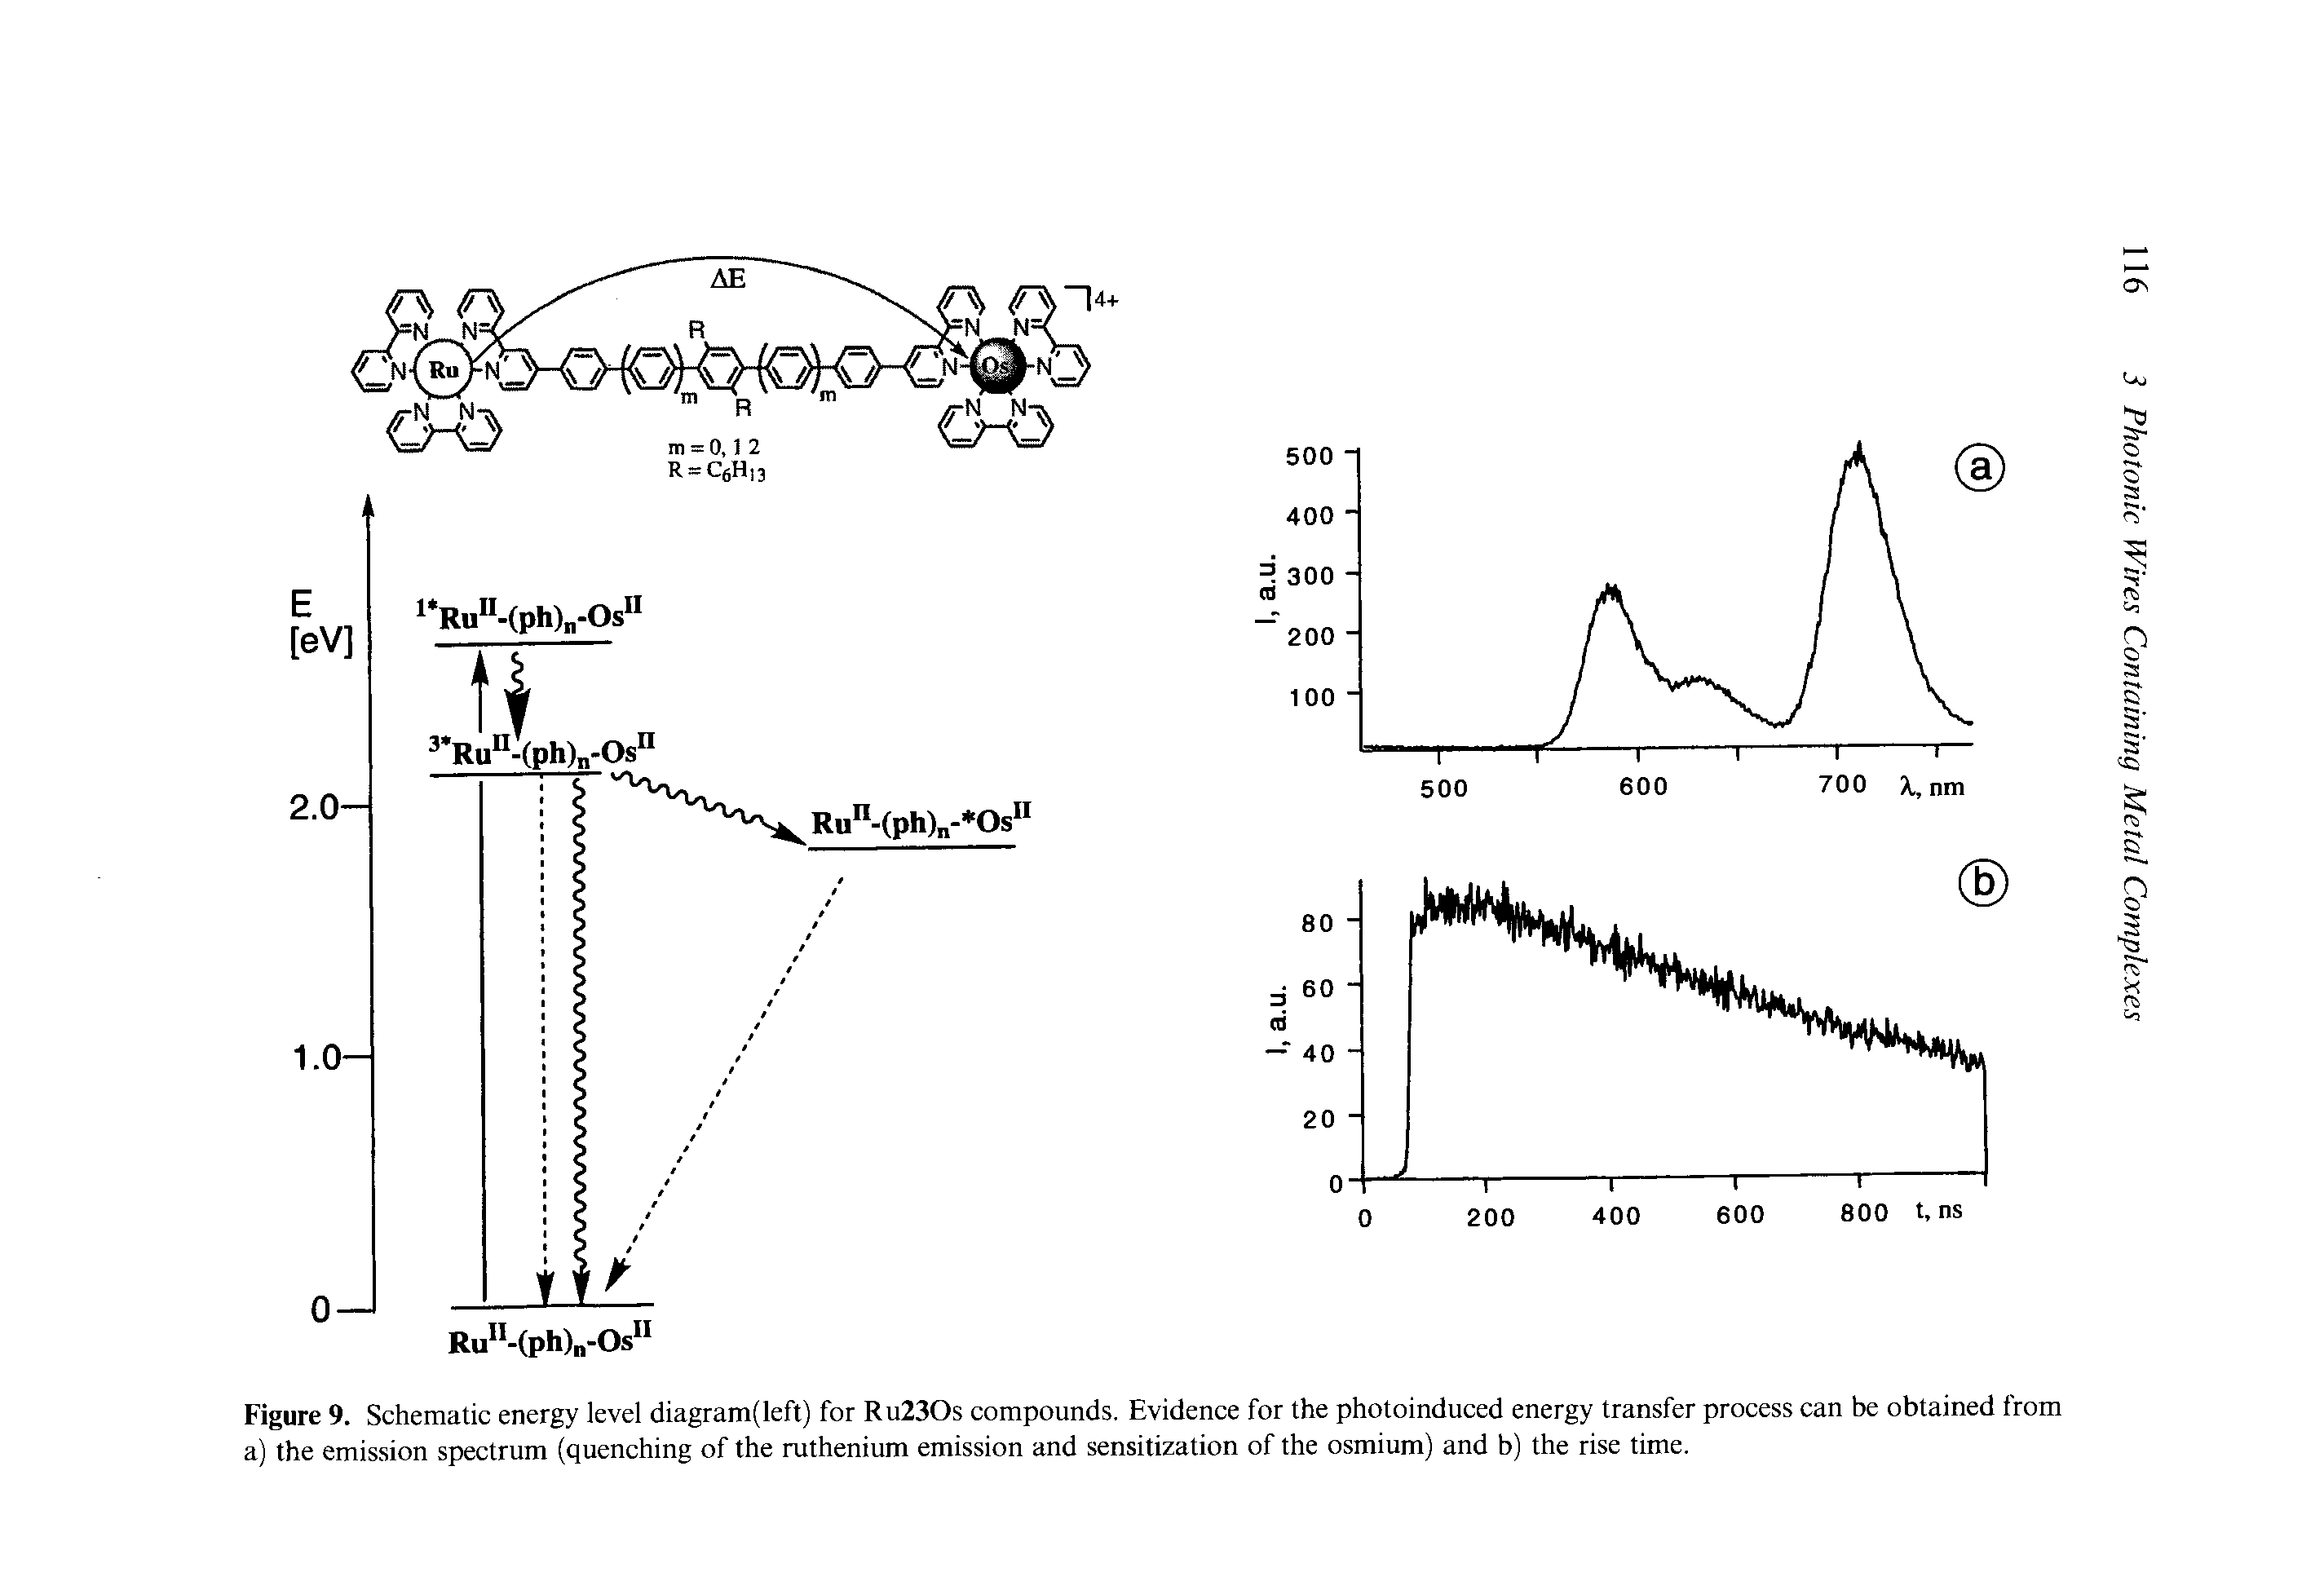 Figure 9. Schematic energy level diagram(left) for Ru230s compounds. Evidence for the photoinduced energy transfer process can be obtained from a) the emission spectrum (quenching of the ruthenium emission and sensitization of the osmium) and b) the rise time.